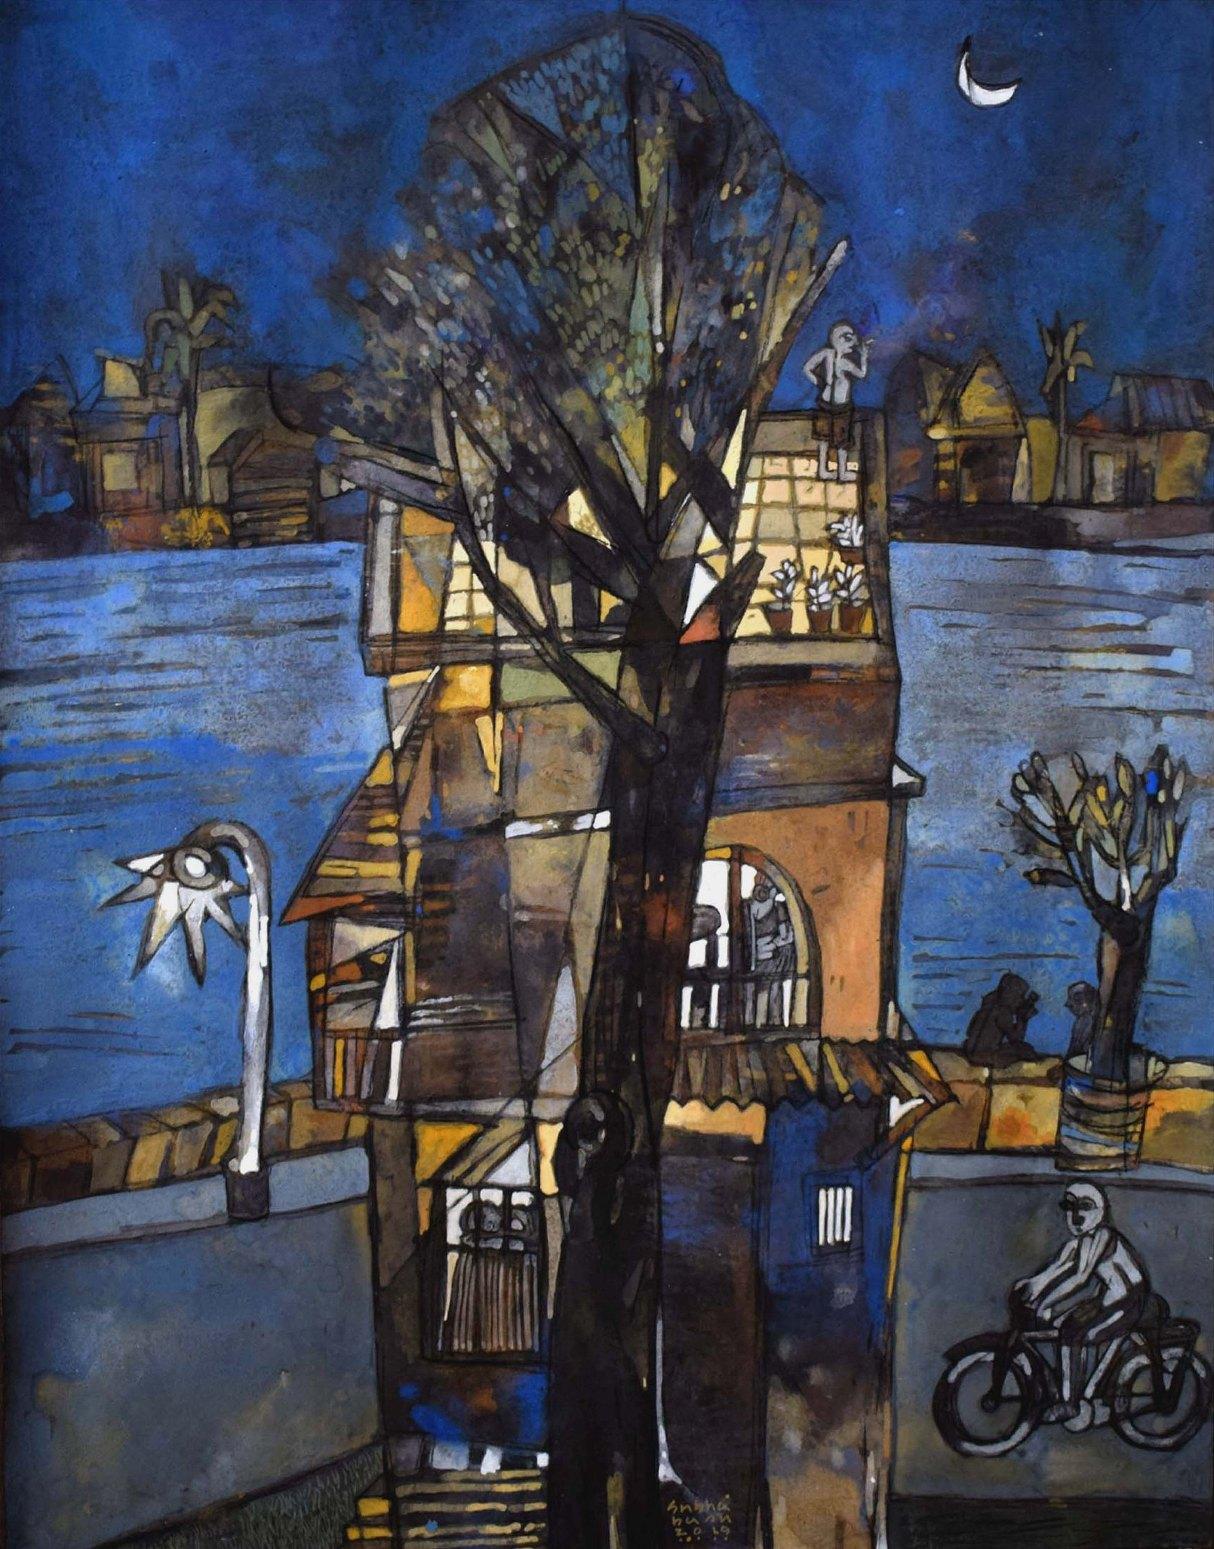 The House Beside River, Tempera & Charcoal on Acid Free Paper "In Stock"